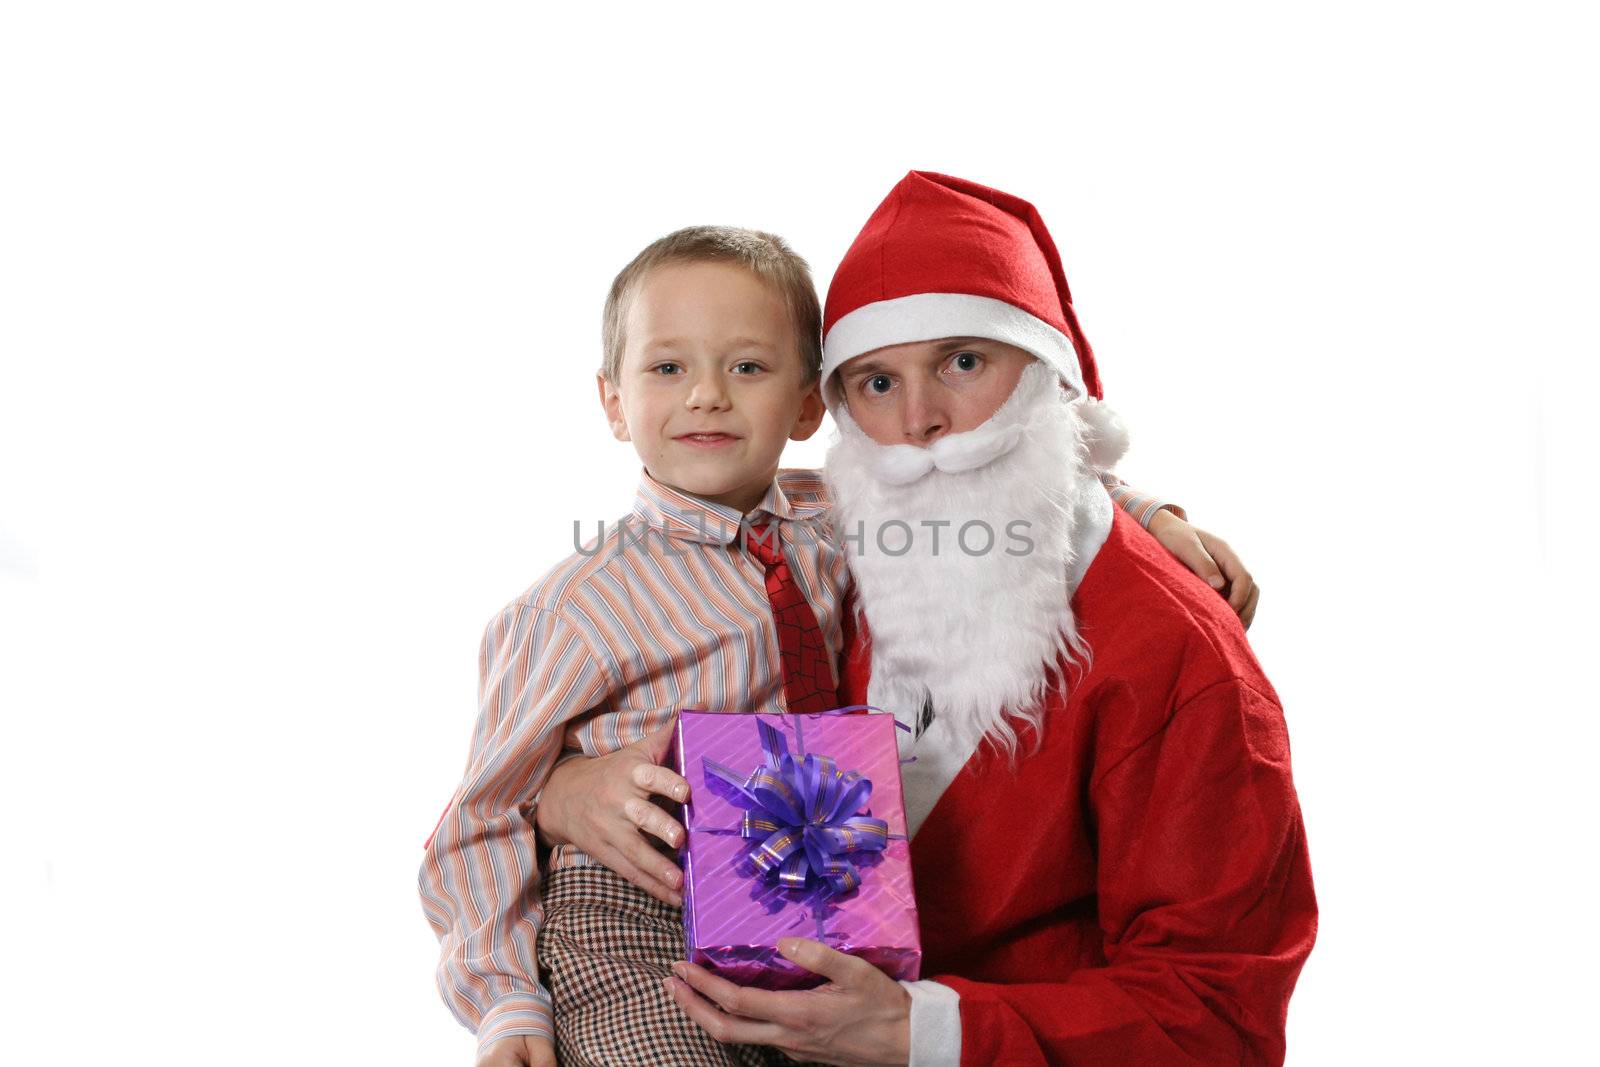 Santa together with the little boy and a gift on a white background